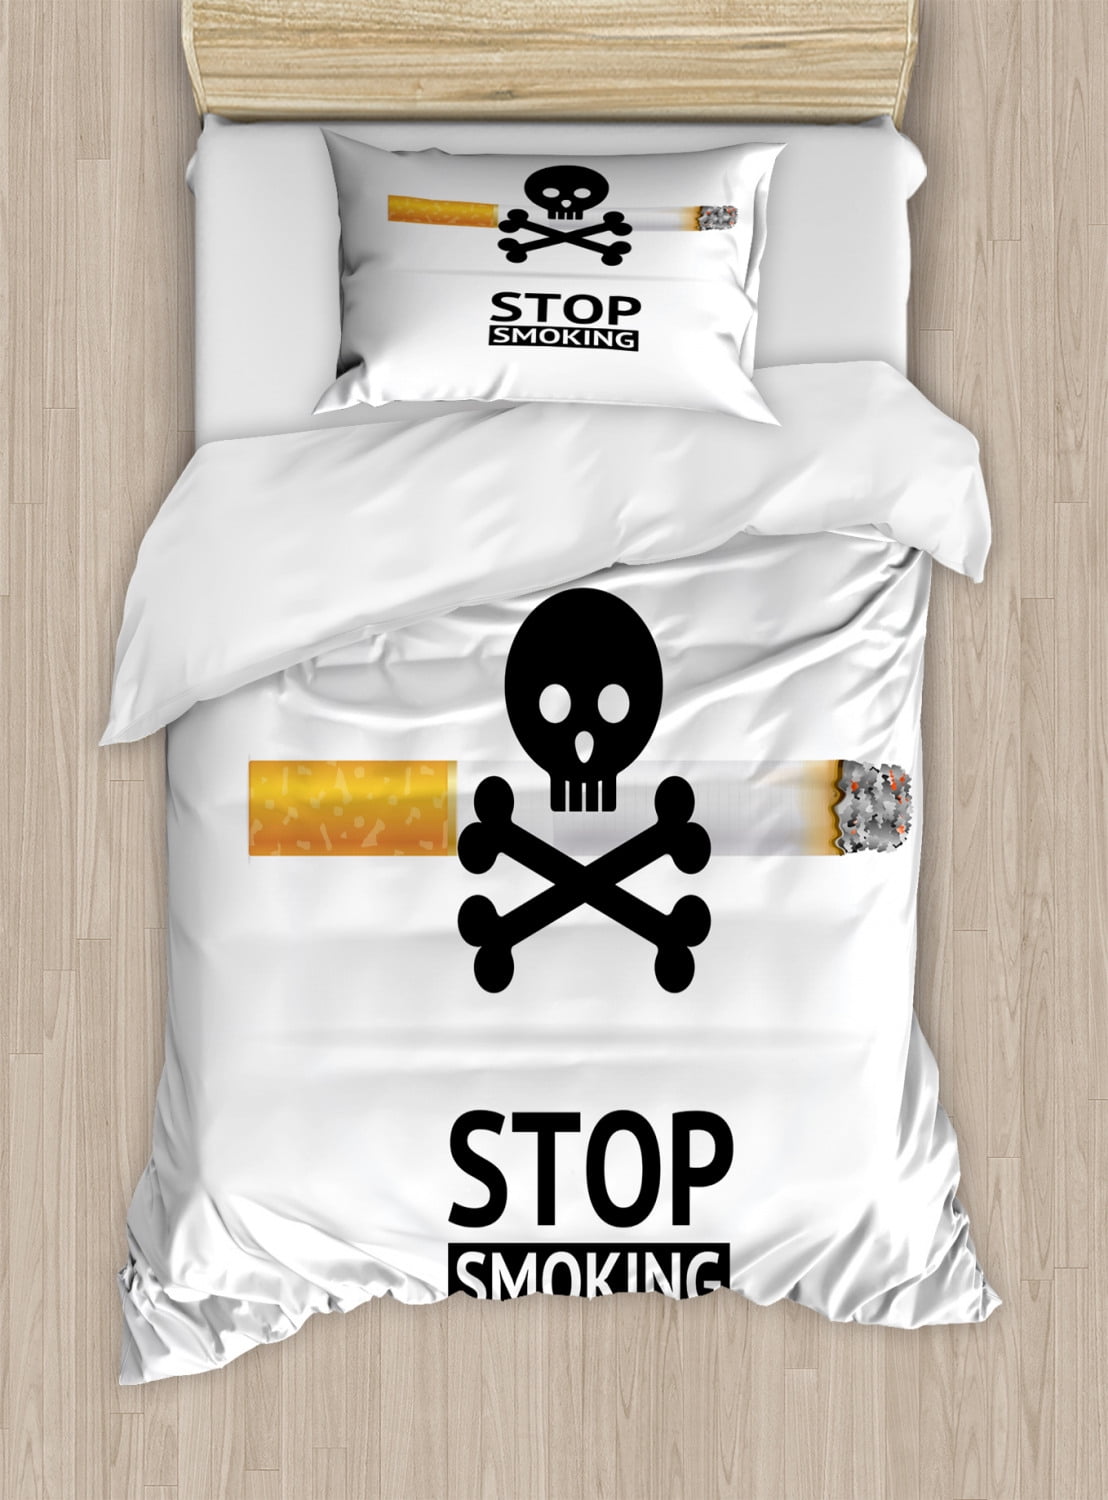 Skull Smoking Duvet Twin Size, Danger About Health Issues and Cigarette on Background, Decorative 2 Piece Bedding Set with 1 Pillow Sham, Off White Charcoal Grey, Ambesonne - Walmart.com